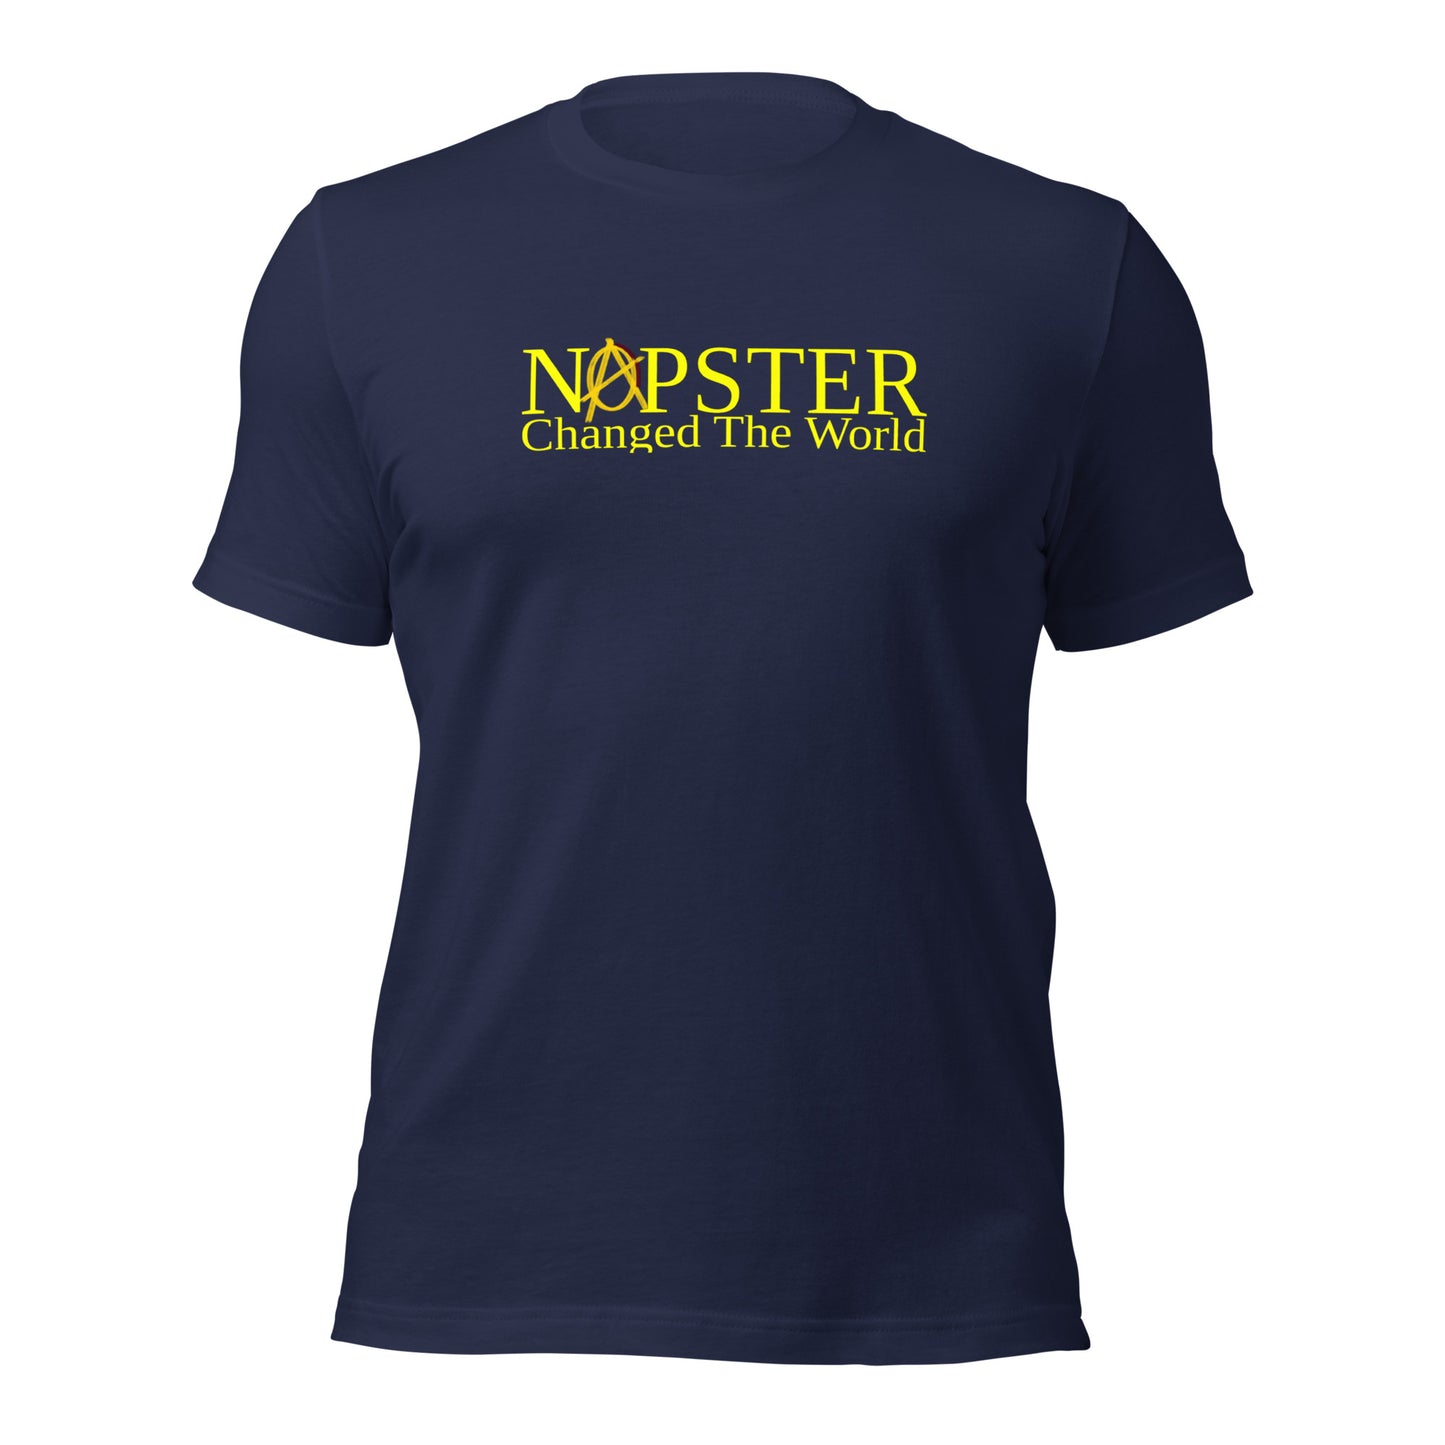 Anarchy Wear "NAPSTER changed the World" Unisex t-shirt